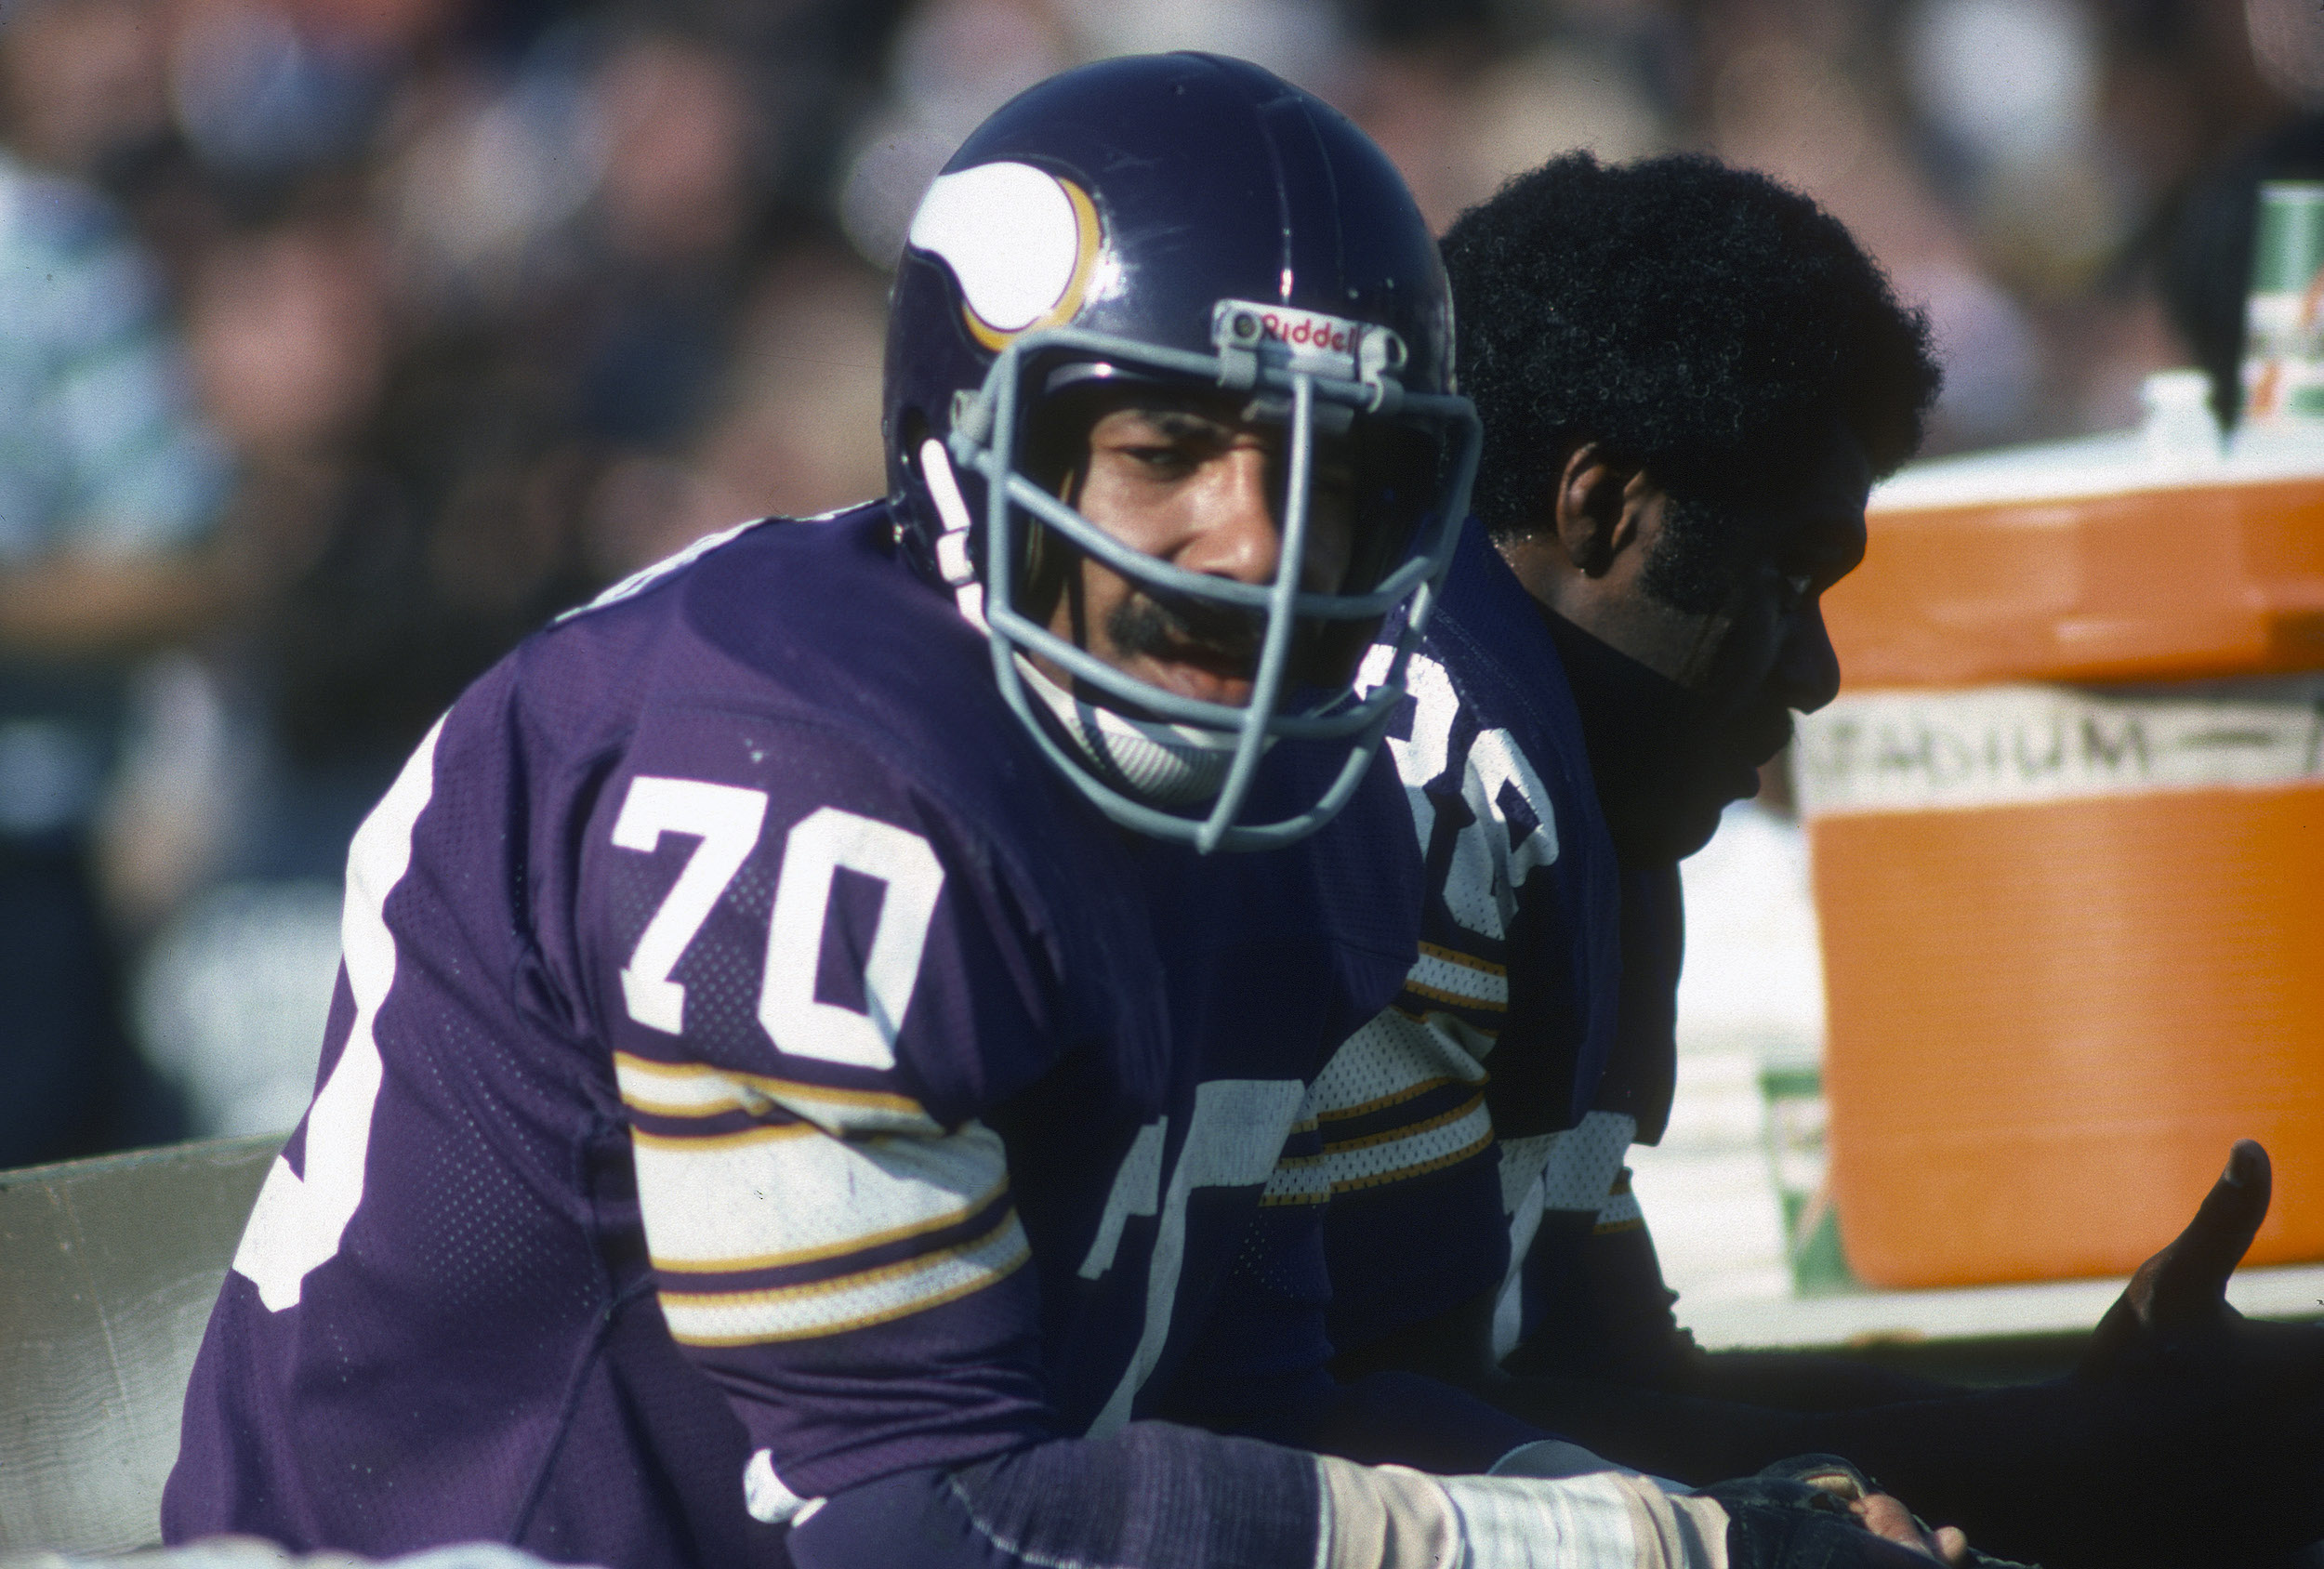 Minnesota Vikings defensive end Jim Marshall survived in a blizzard by literally burning money.